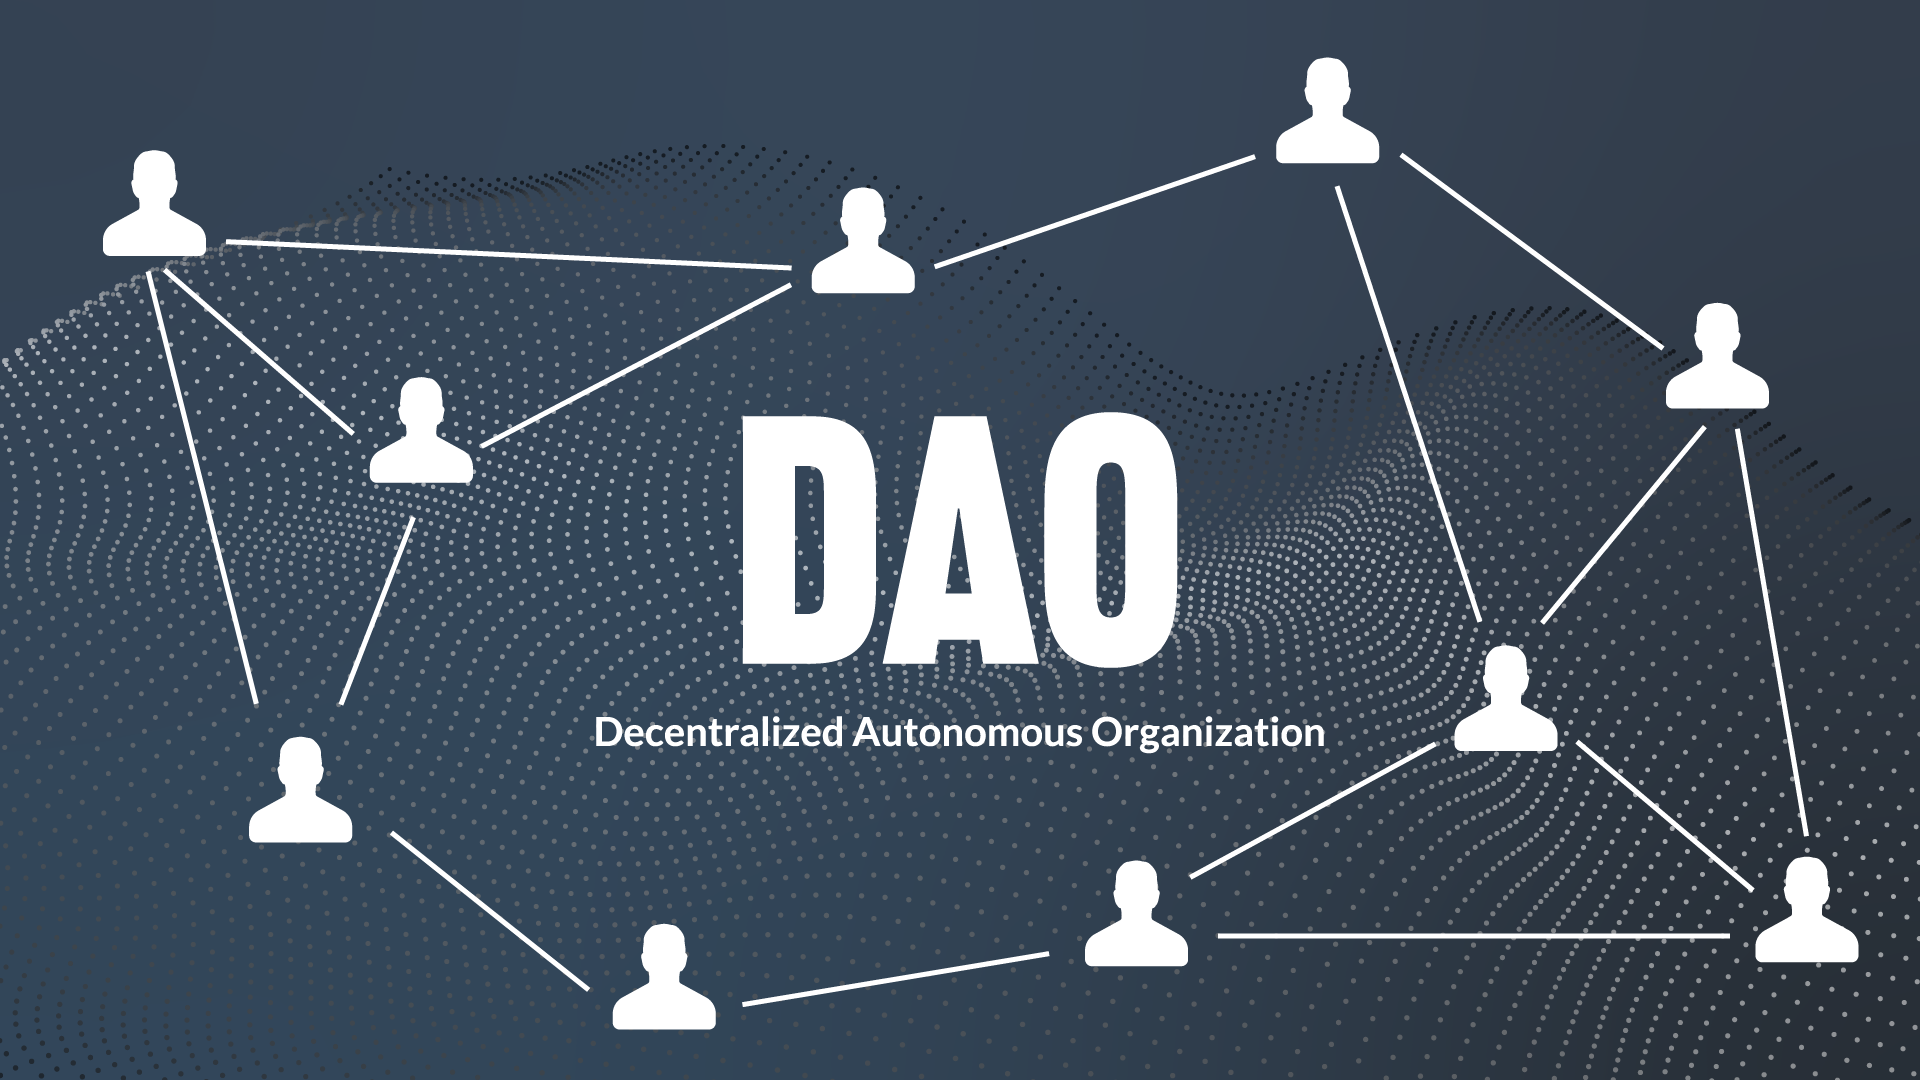 Cover Image for Why DAOs Might Be the Next Big Thing